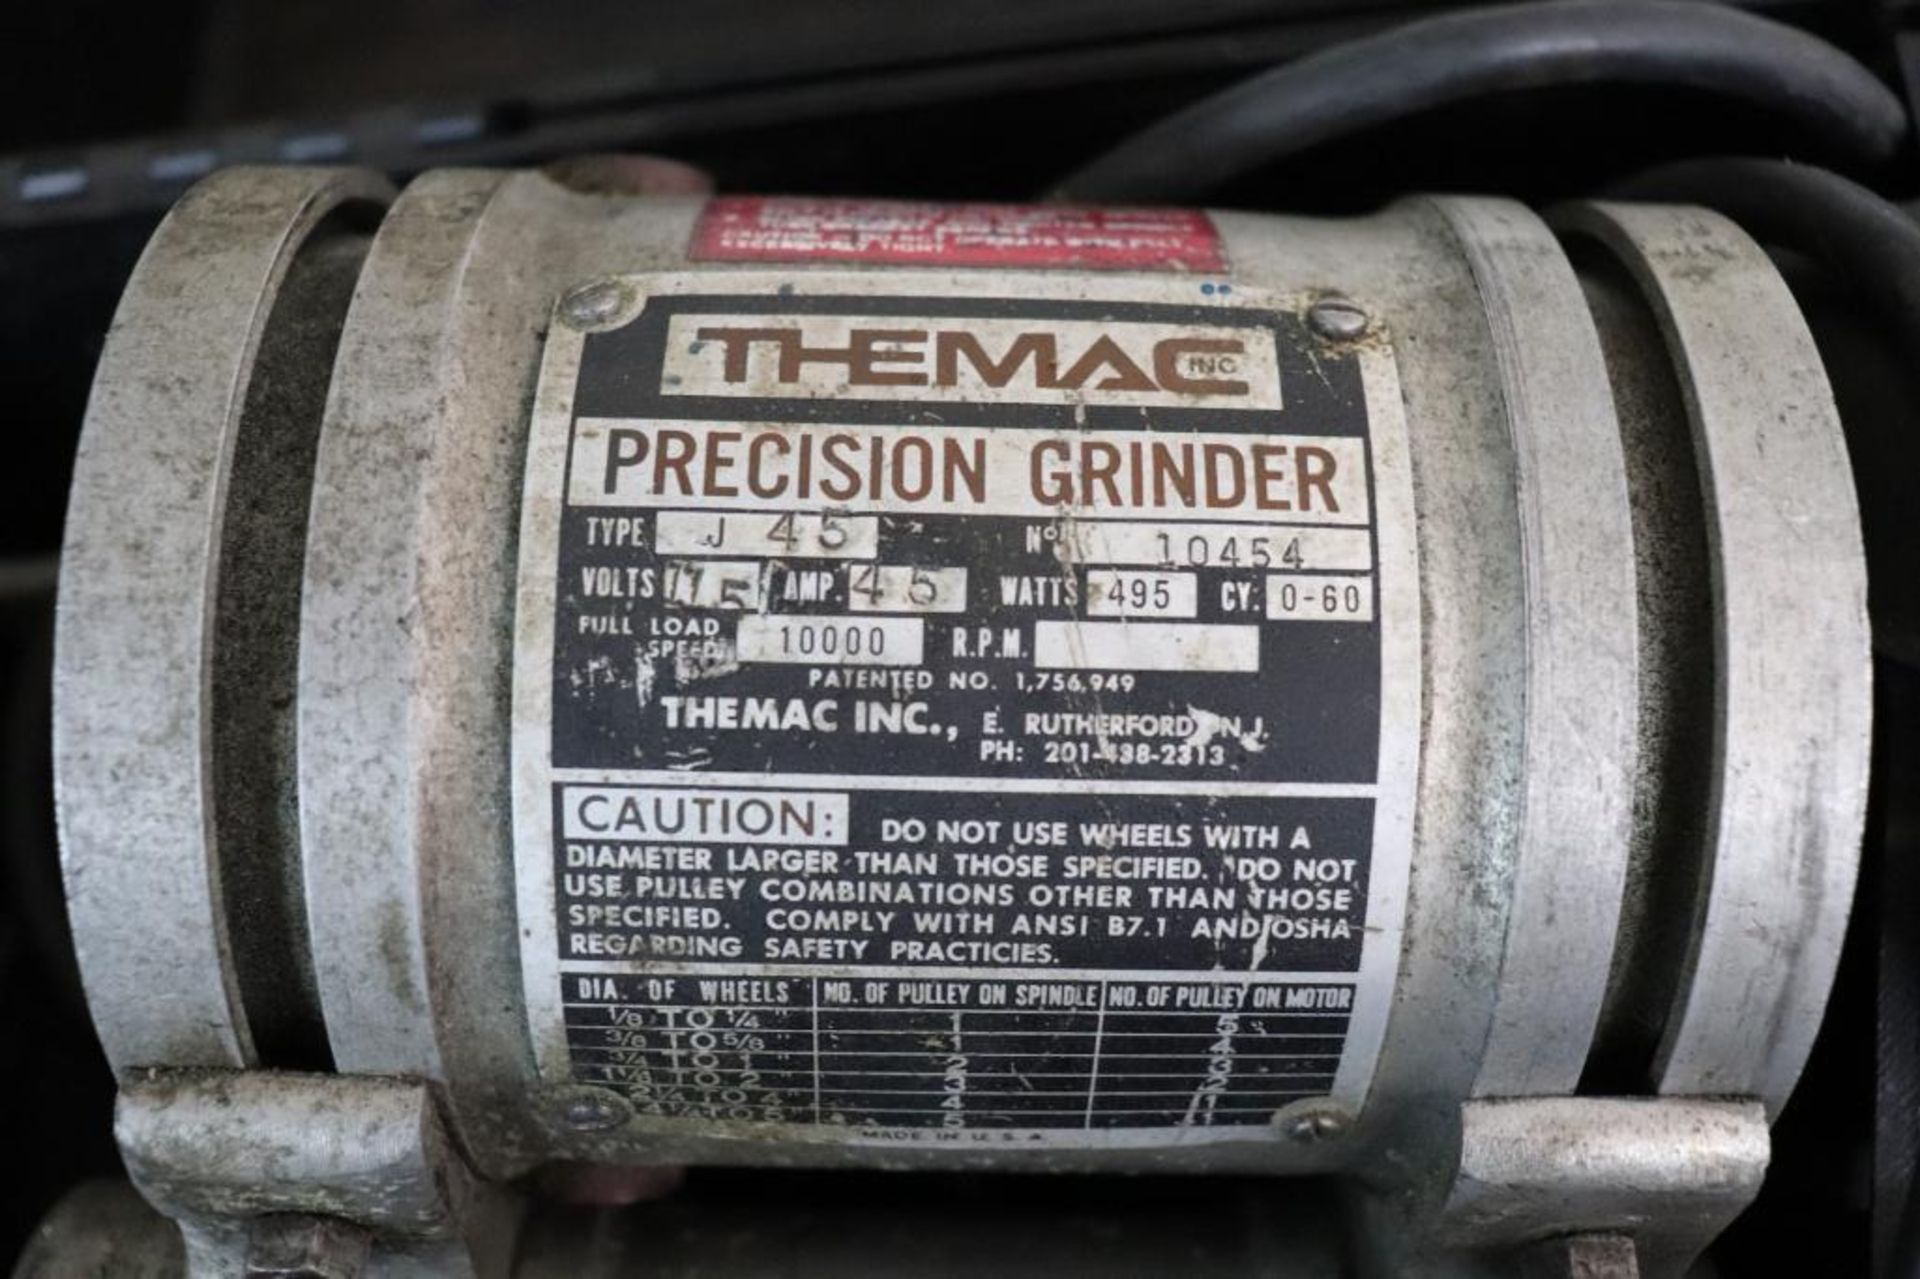 Themac J-45 tool post grinder - Image 3 of 4